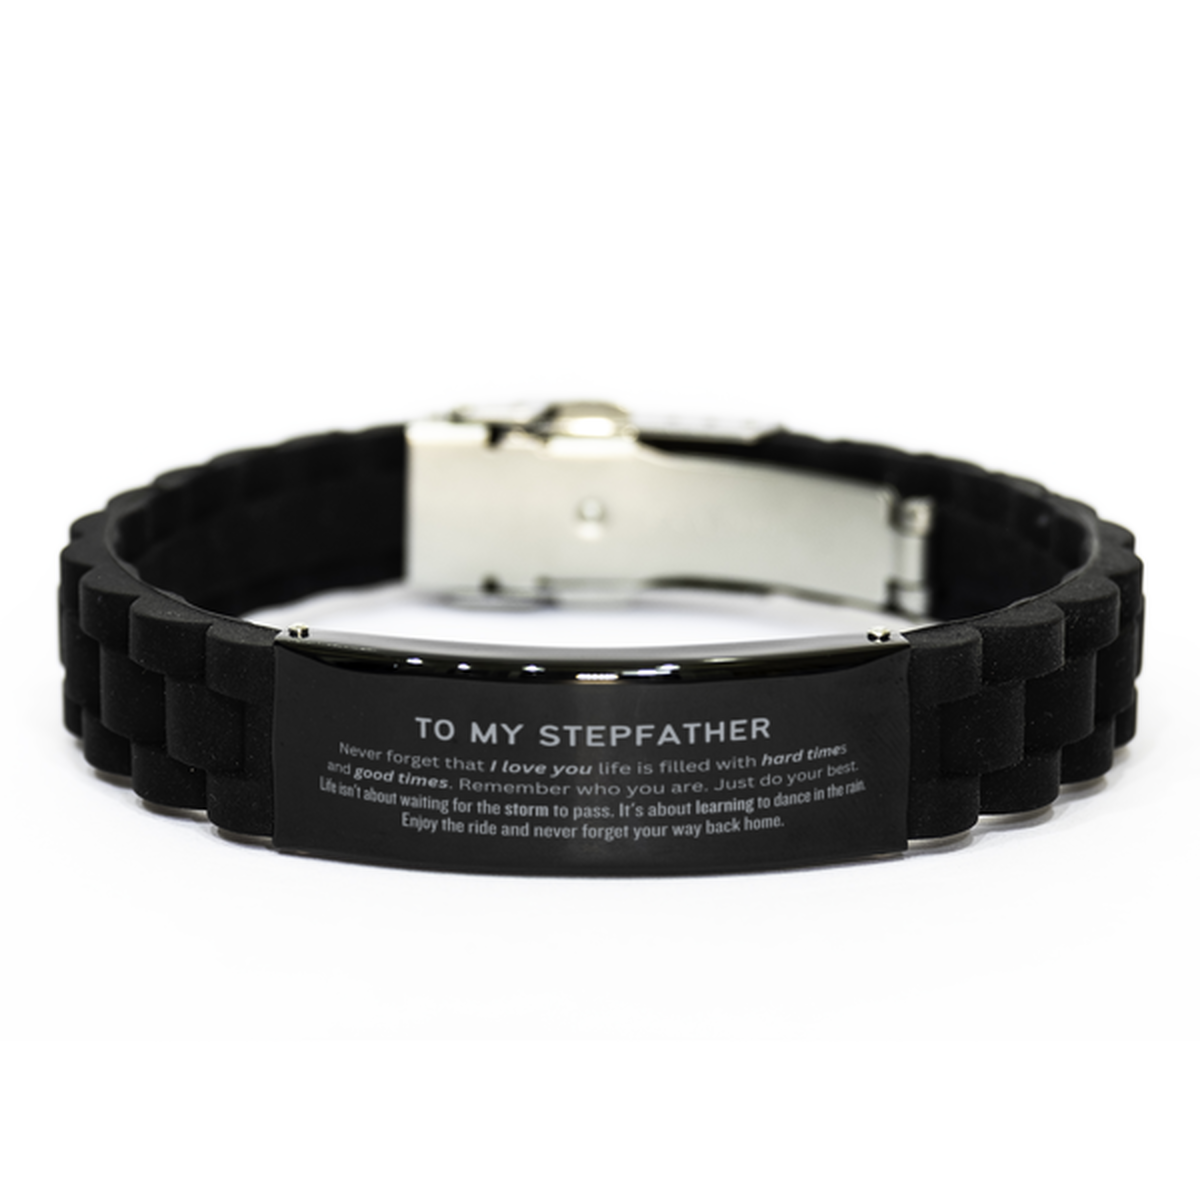 Christmas Stepfather Black Glidelock Clasp Bracelet Gifts, To My Stepfather Birthday Thank You Gifts For Stepfather, Graduation Unique Gifts For Stepfather To My Stepfather Never forget that I love you life is filled with hard times and good times. Rememb